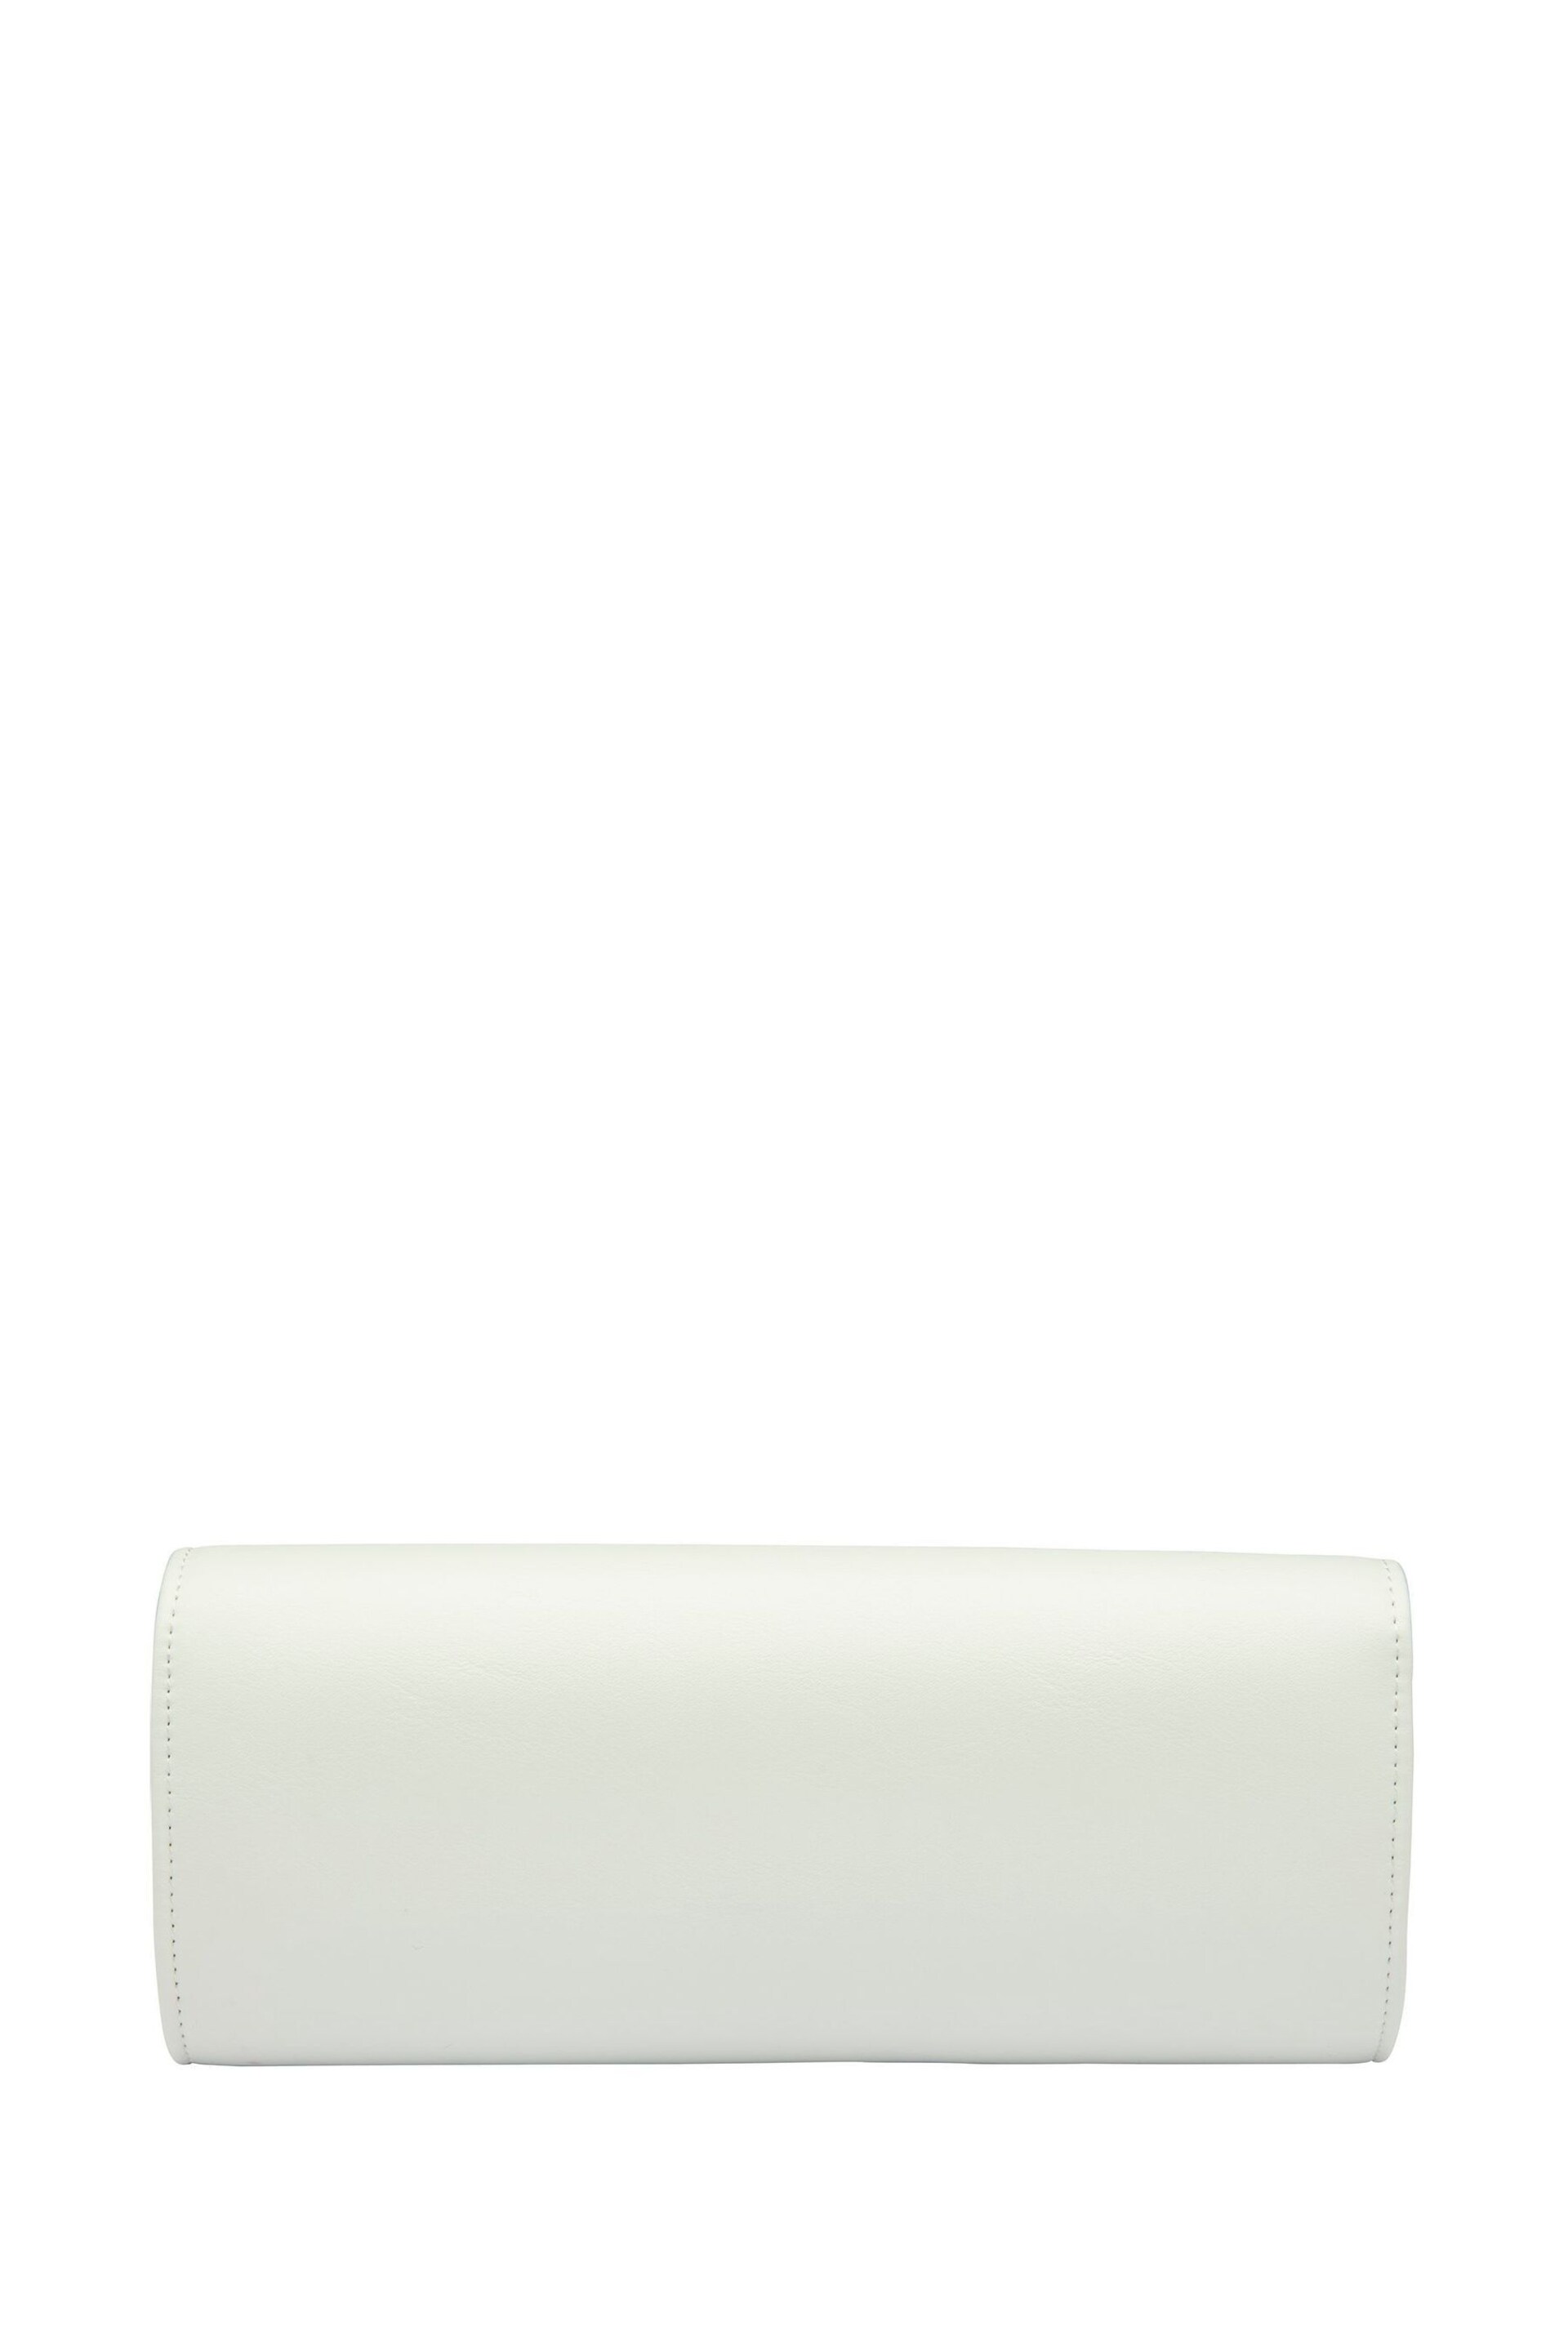 Lotus White Clutch Bag with Chain - Image 2 of 4